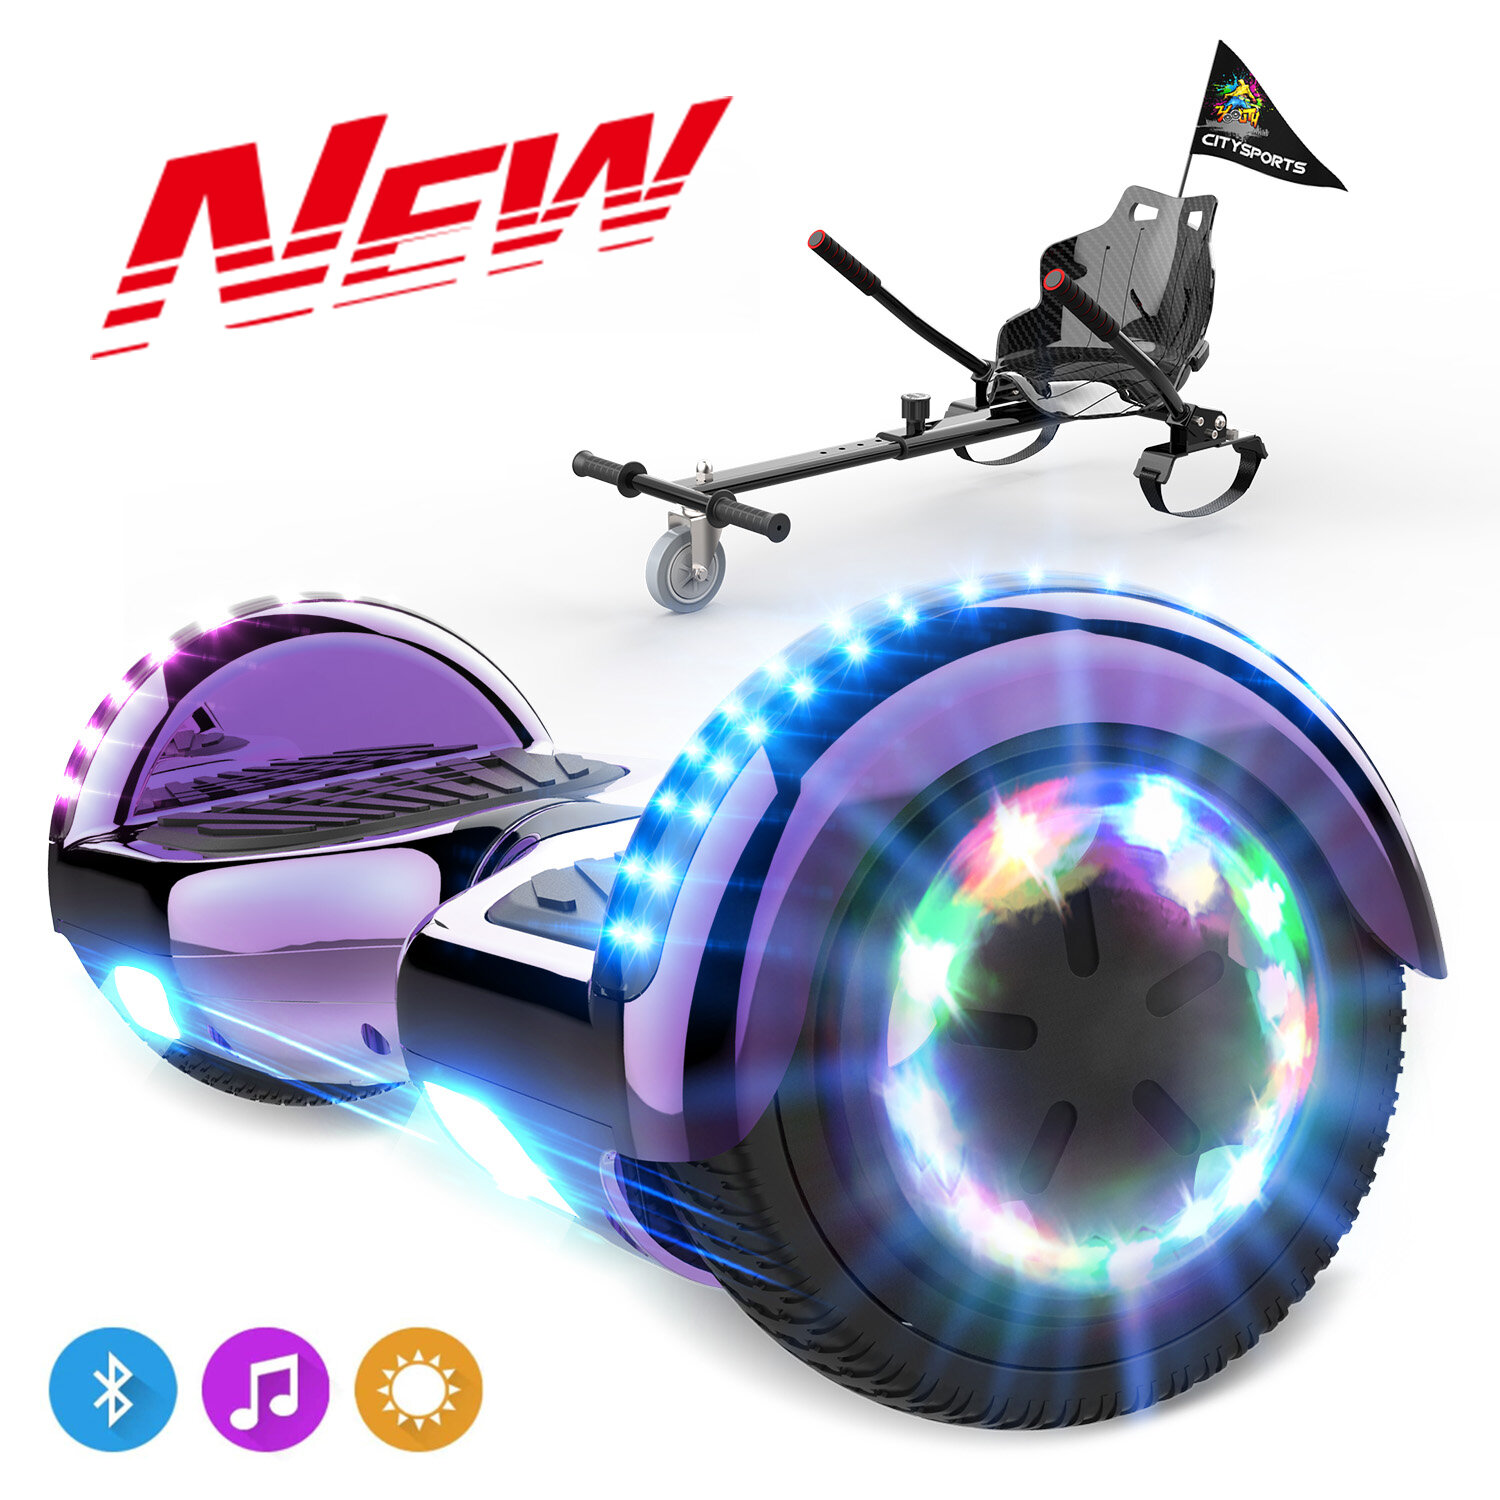 COOL&FUN Hoverboards with seat,Hoverboards with hoverkart,LEDBluetooth